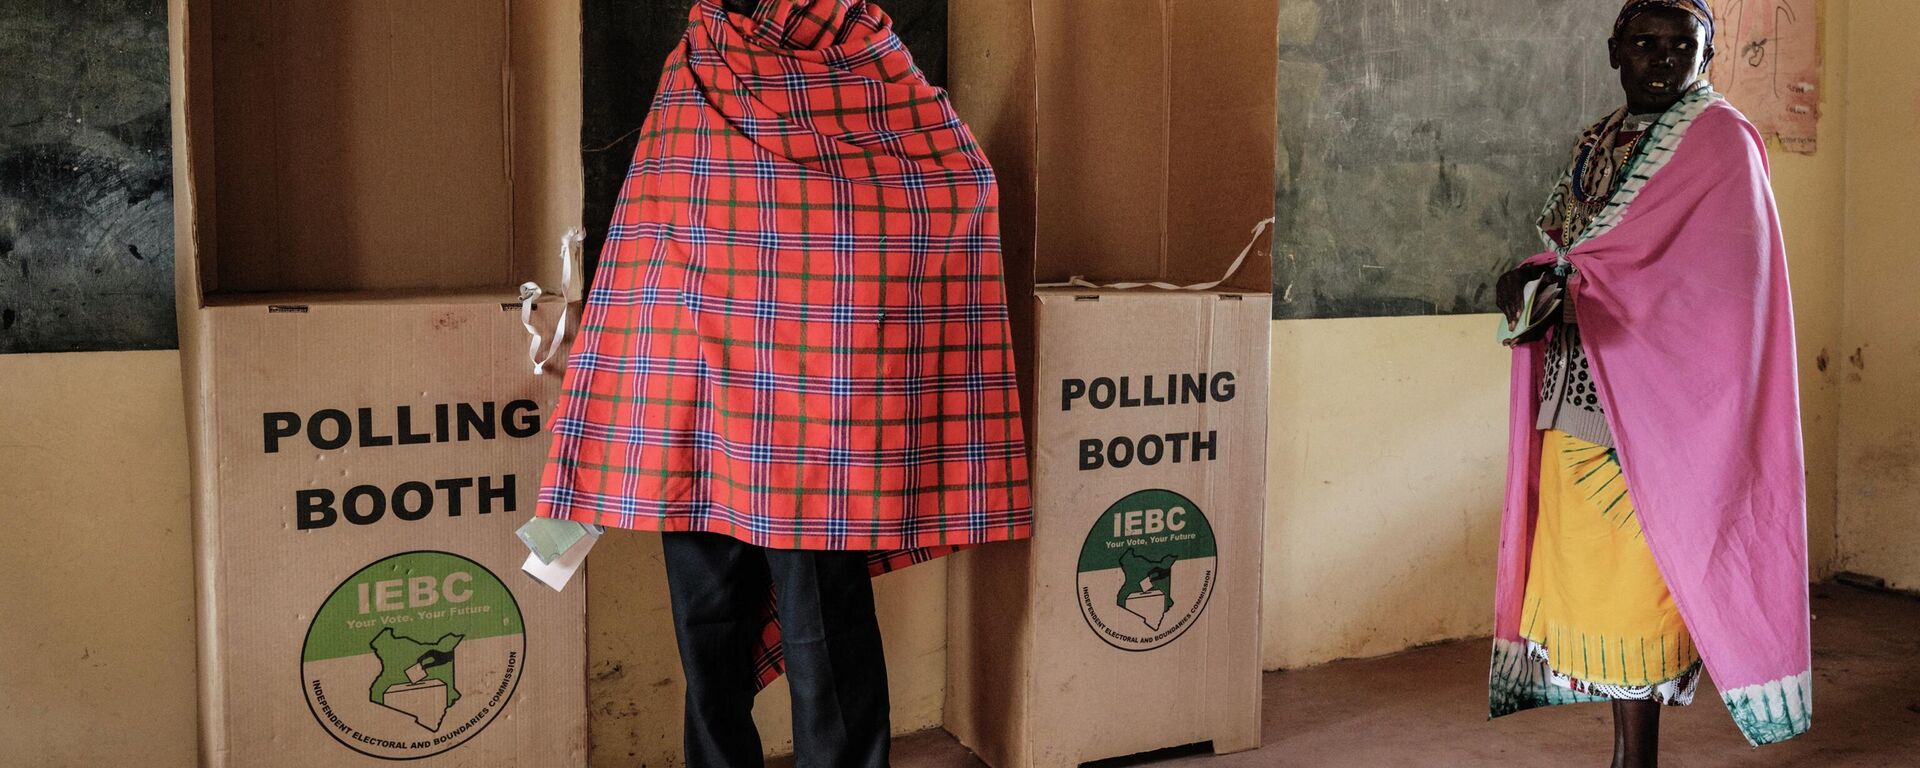 A Maasai man and woman wait for an assistance with the voting process during Kenya's general election at Nailare primary school polling station in Kilgoris, Kenya, on August 9, 2022 - Sputnik International, 1920, 09.08.2022